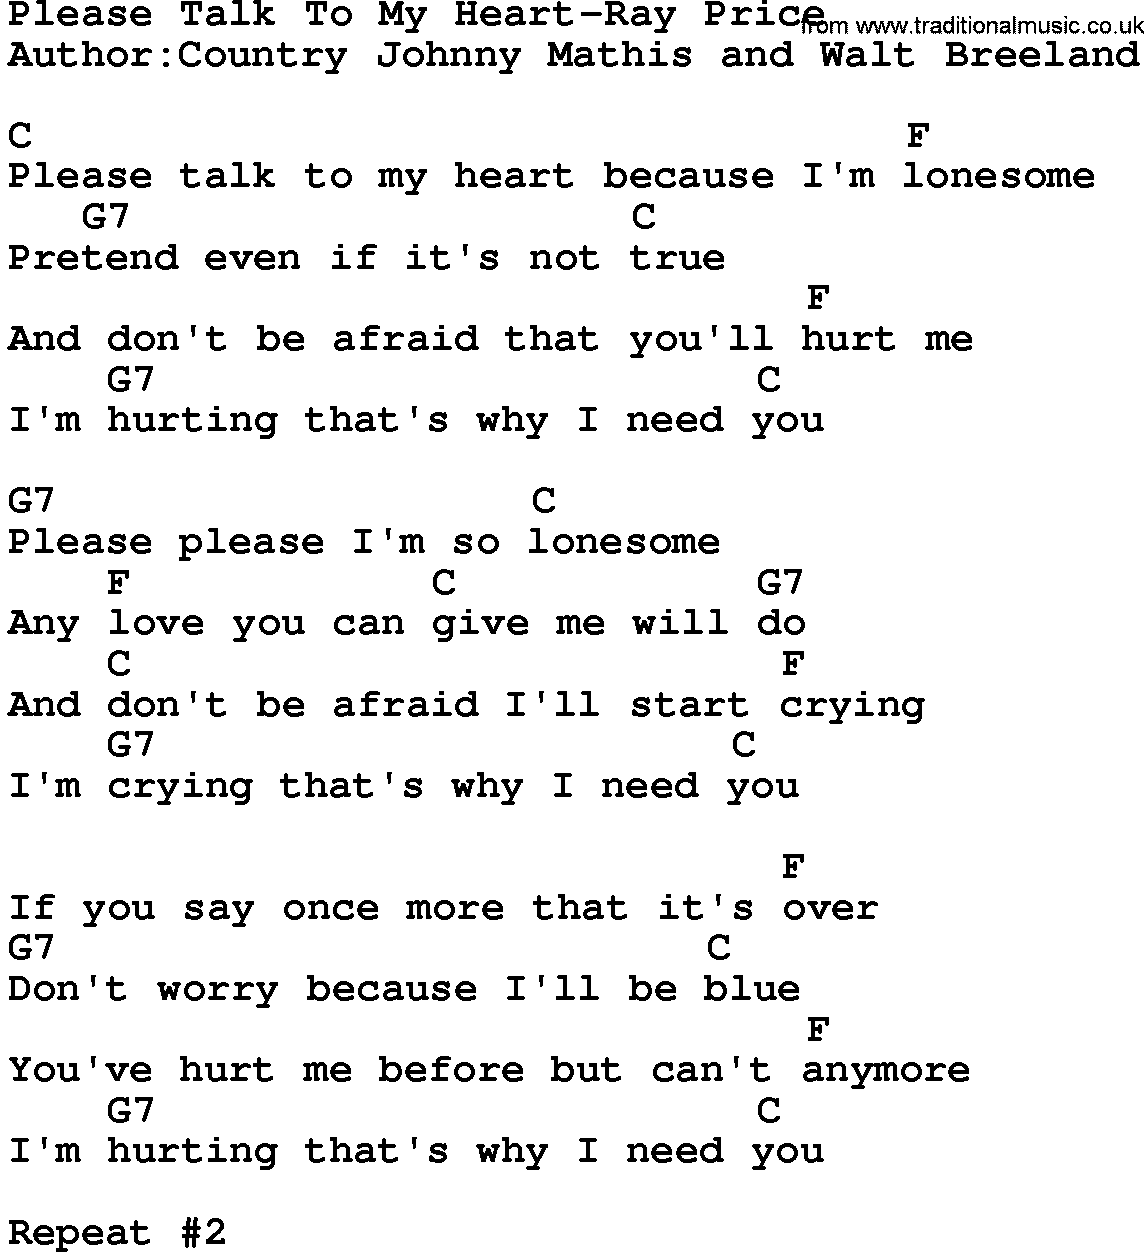 Country music song: Please Talk To My Heart-Ray Price lyrics and chords